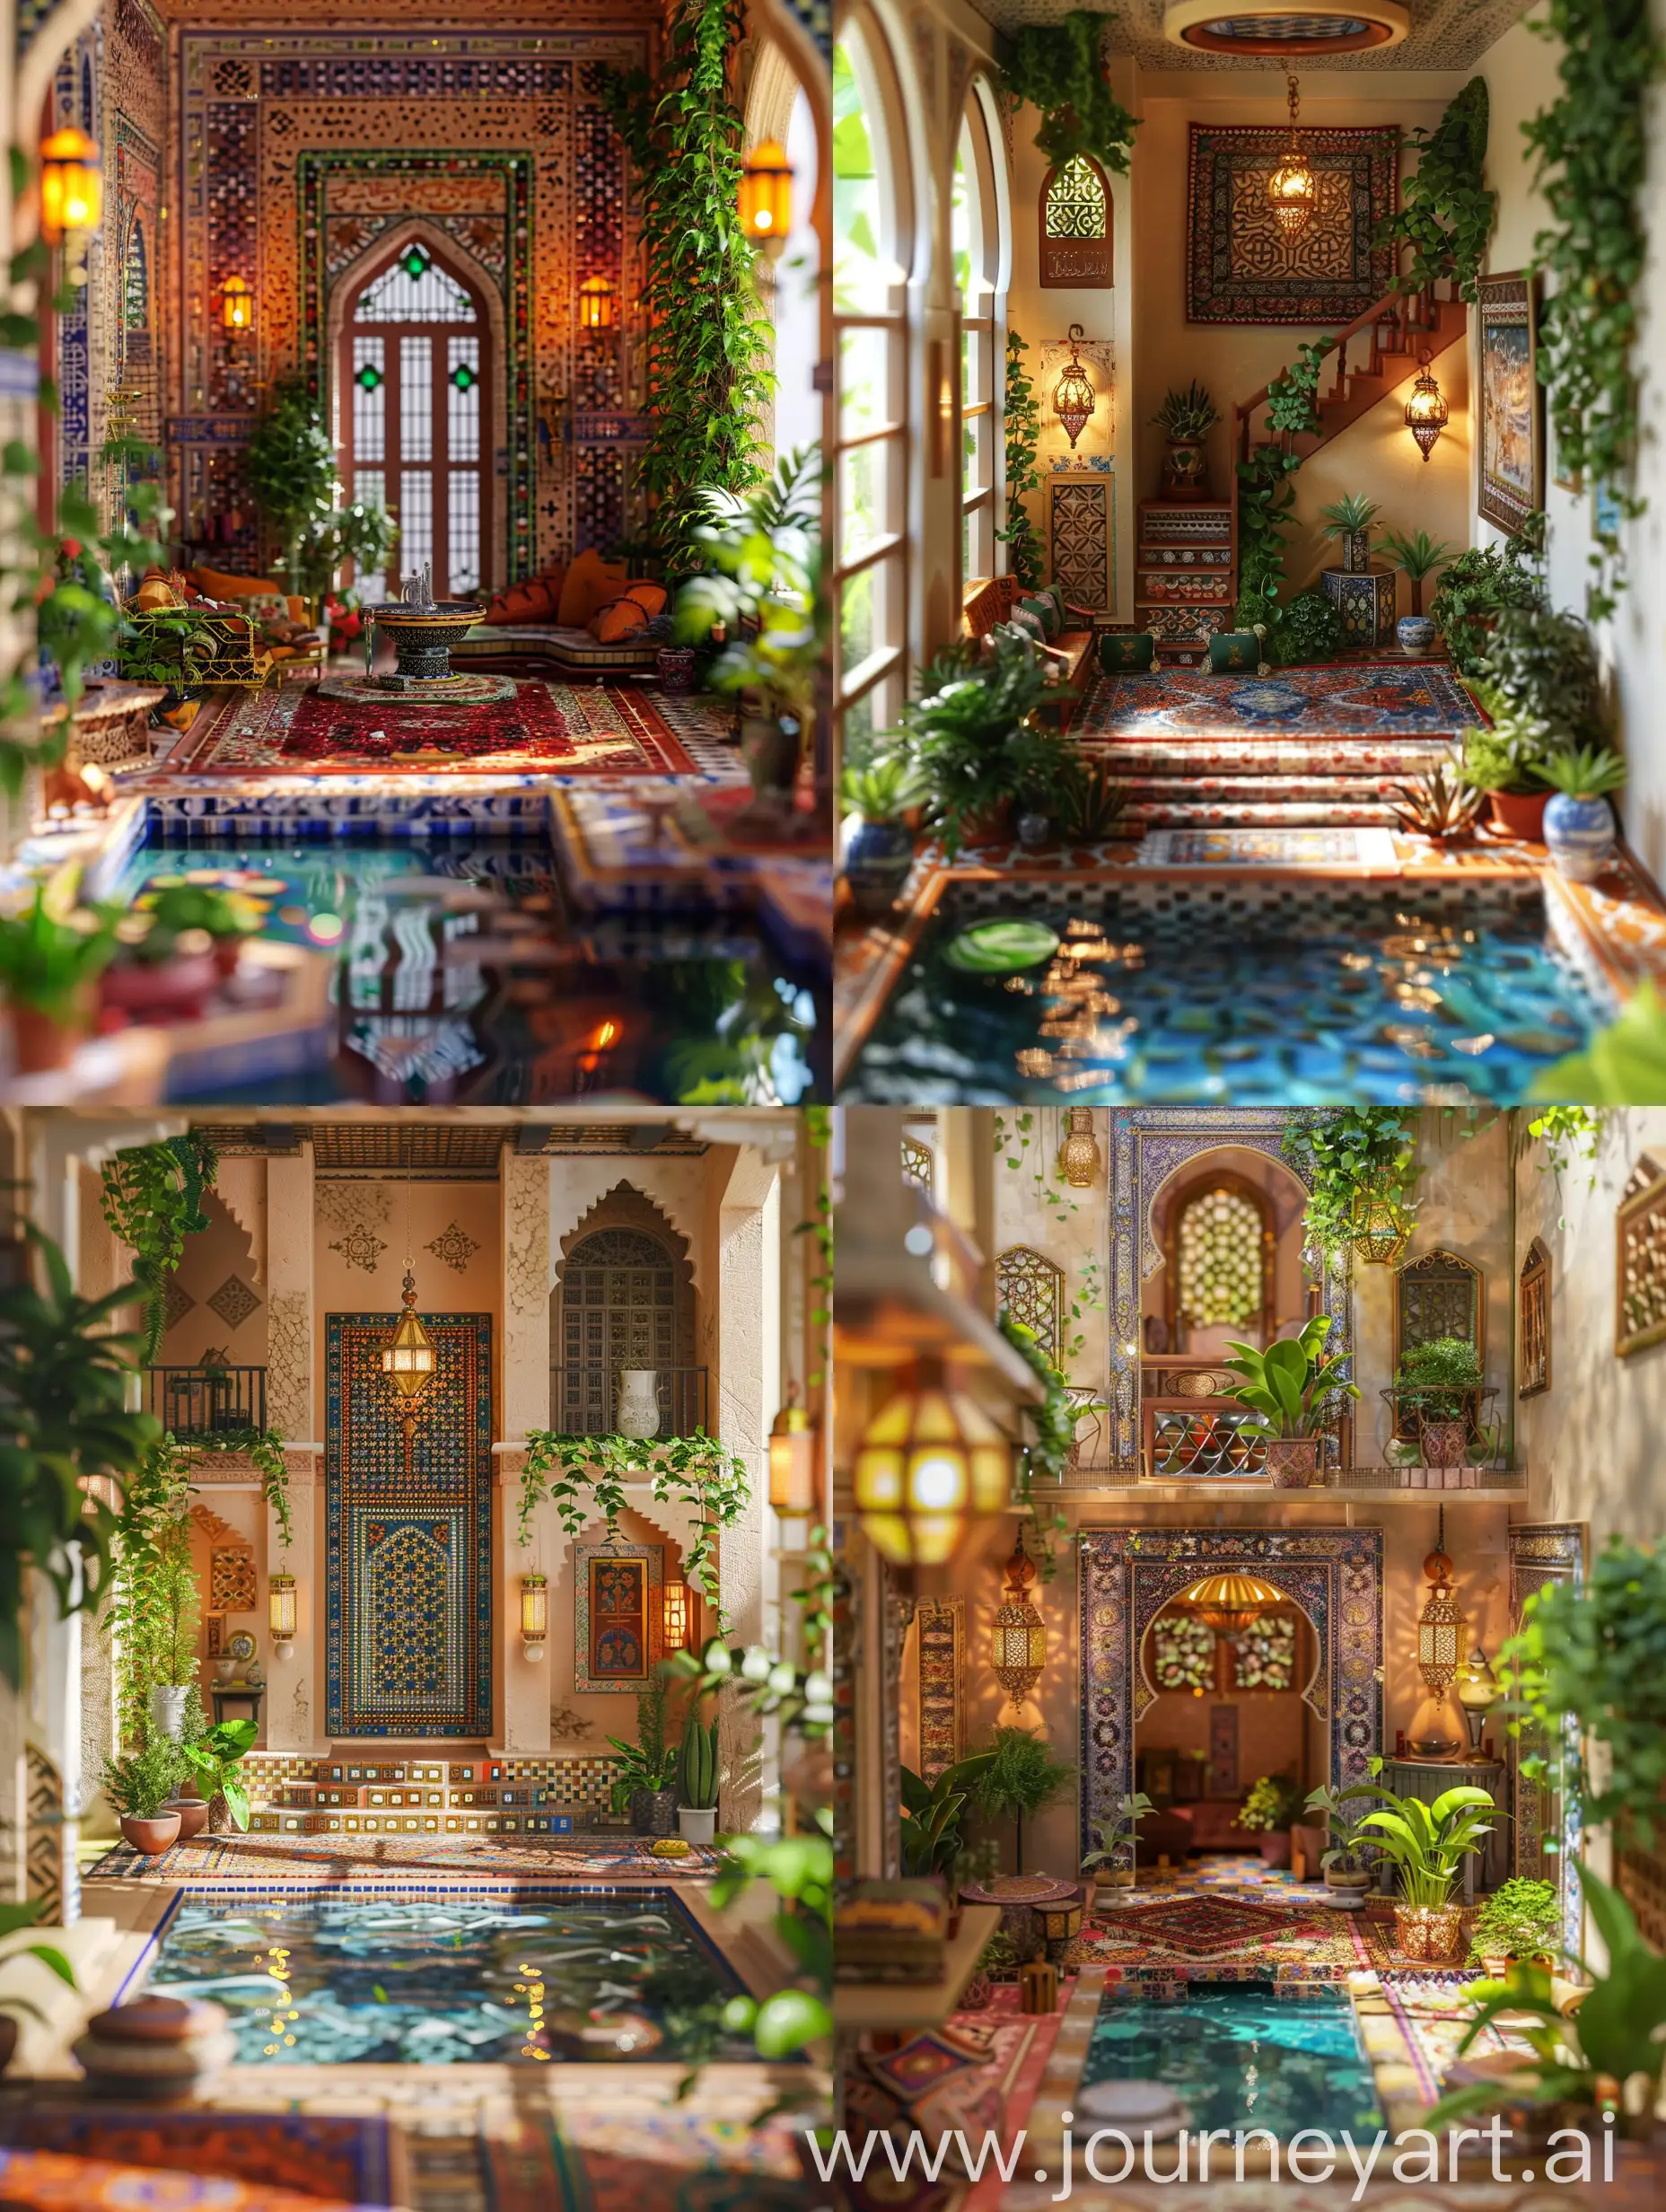  Miniature scene, interior of an Arab-style duplex house Miniature scene, Arab-style elements, furnishings, tiles and mosaics, carpets, water elements, green plants, wall lamps, geometric patterns, rich colors, spatial artistry, visual depth, luxury, exquisite texture, aesthetic mood, sunlight pouring in, dreamlike, visual aesthetics, ultimate light and shadow effects, light space art, extremely rich details, Arabian style interior decoration Miniature scenes Miniature scenes Masterpieces 